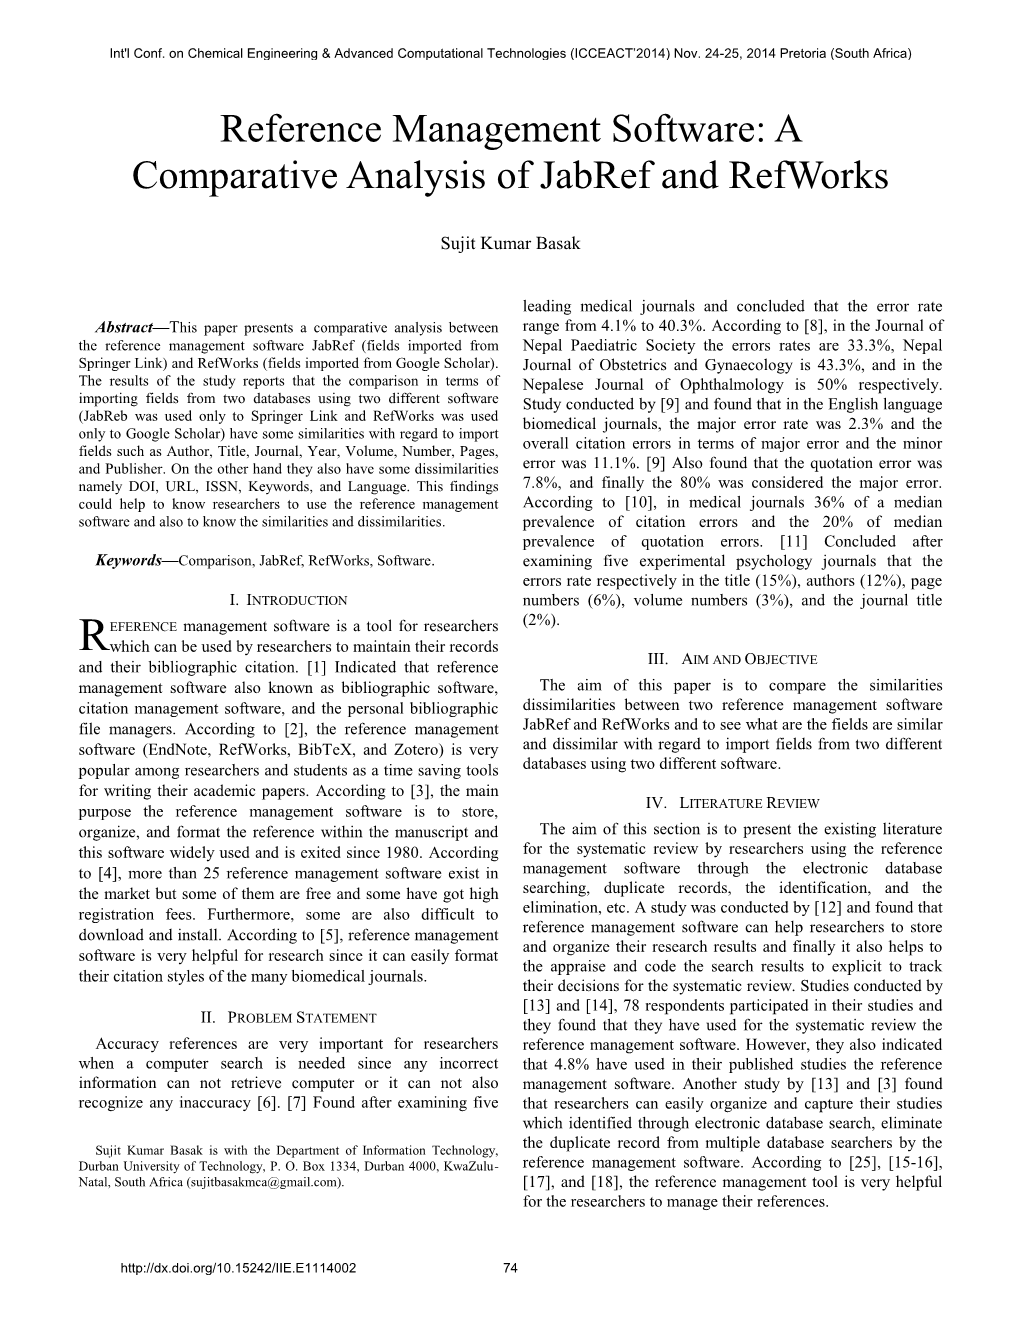 Reference Management Software: a Comparative Analysis of Jabref and Refworks